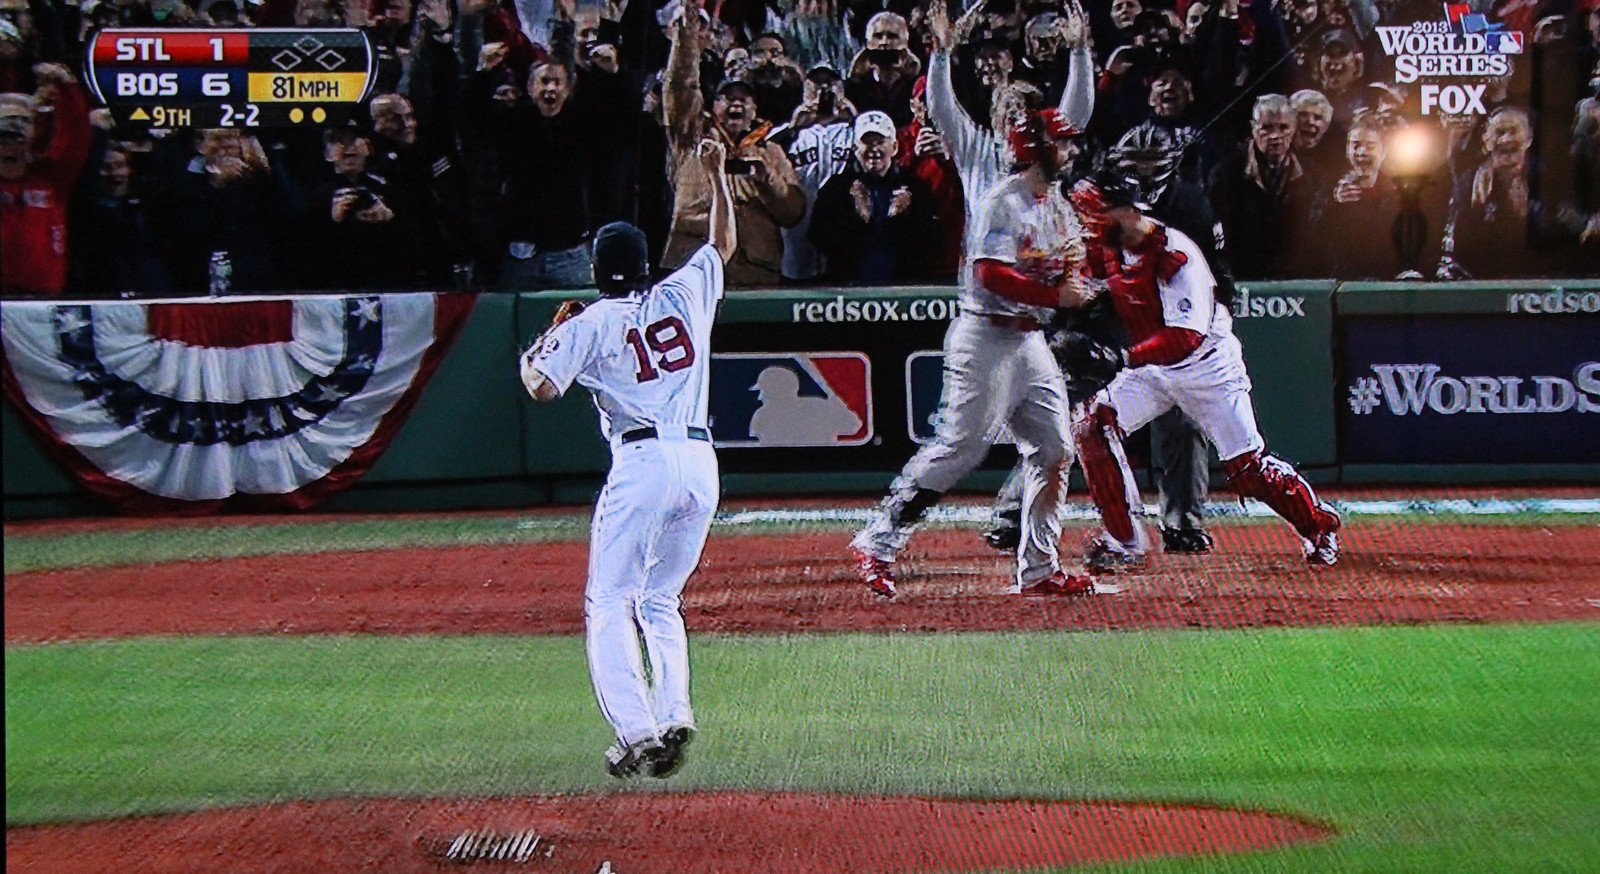 2013 red sox world series